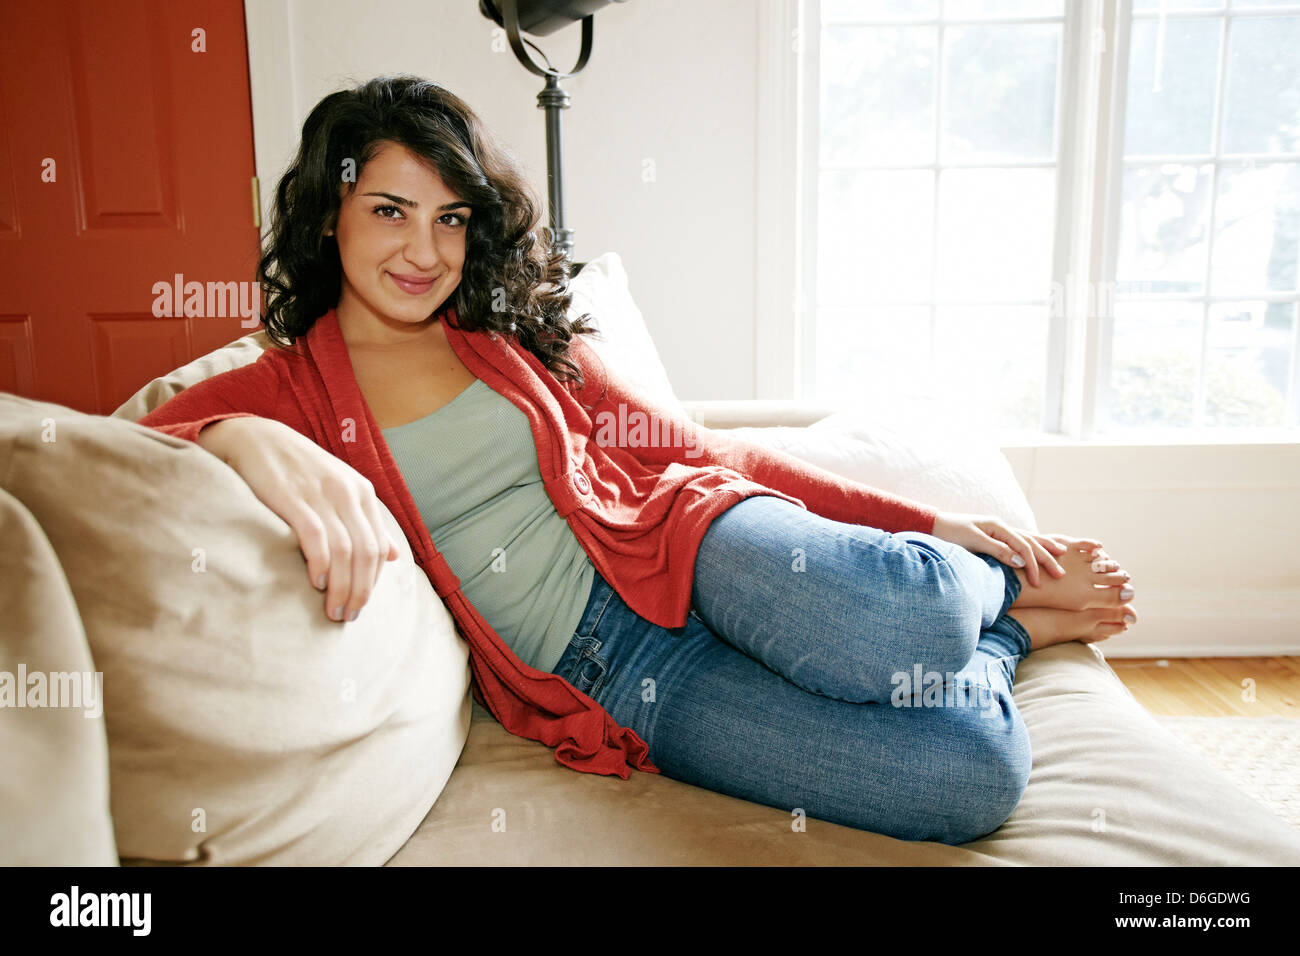 Middle Eastern woman relaxing on sofa Banque D'Images